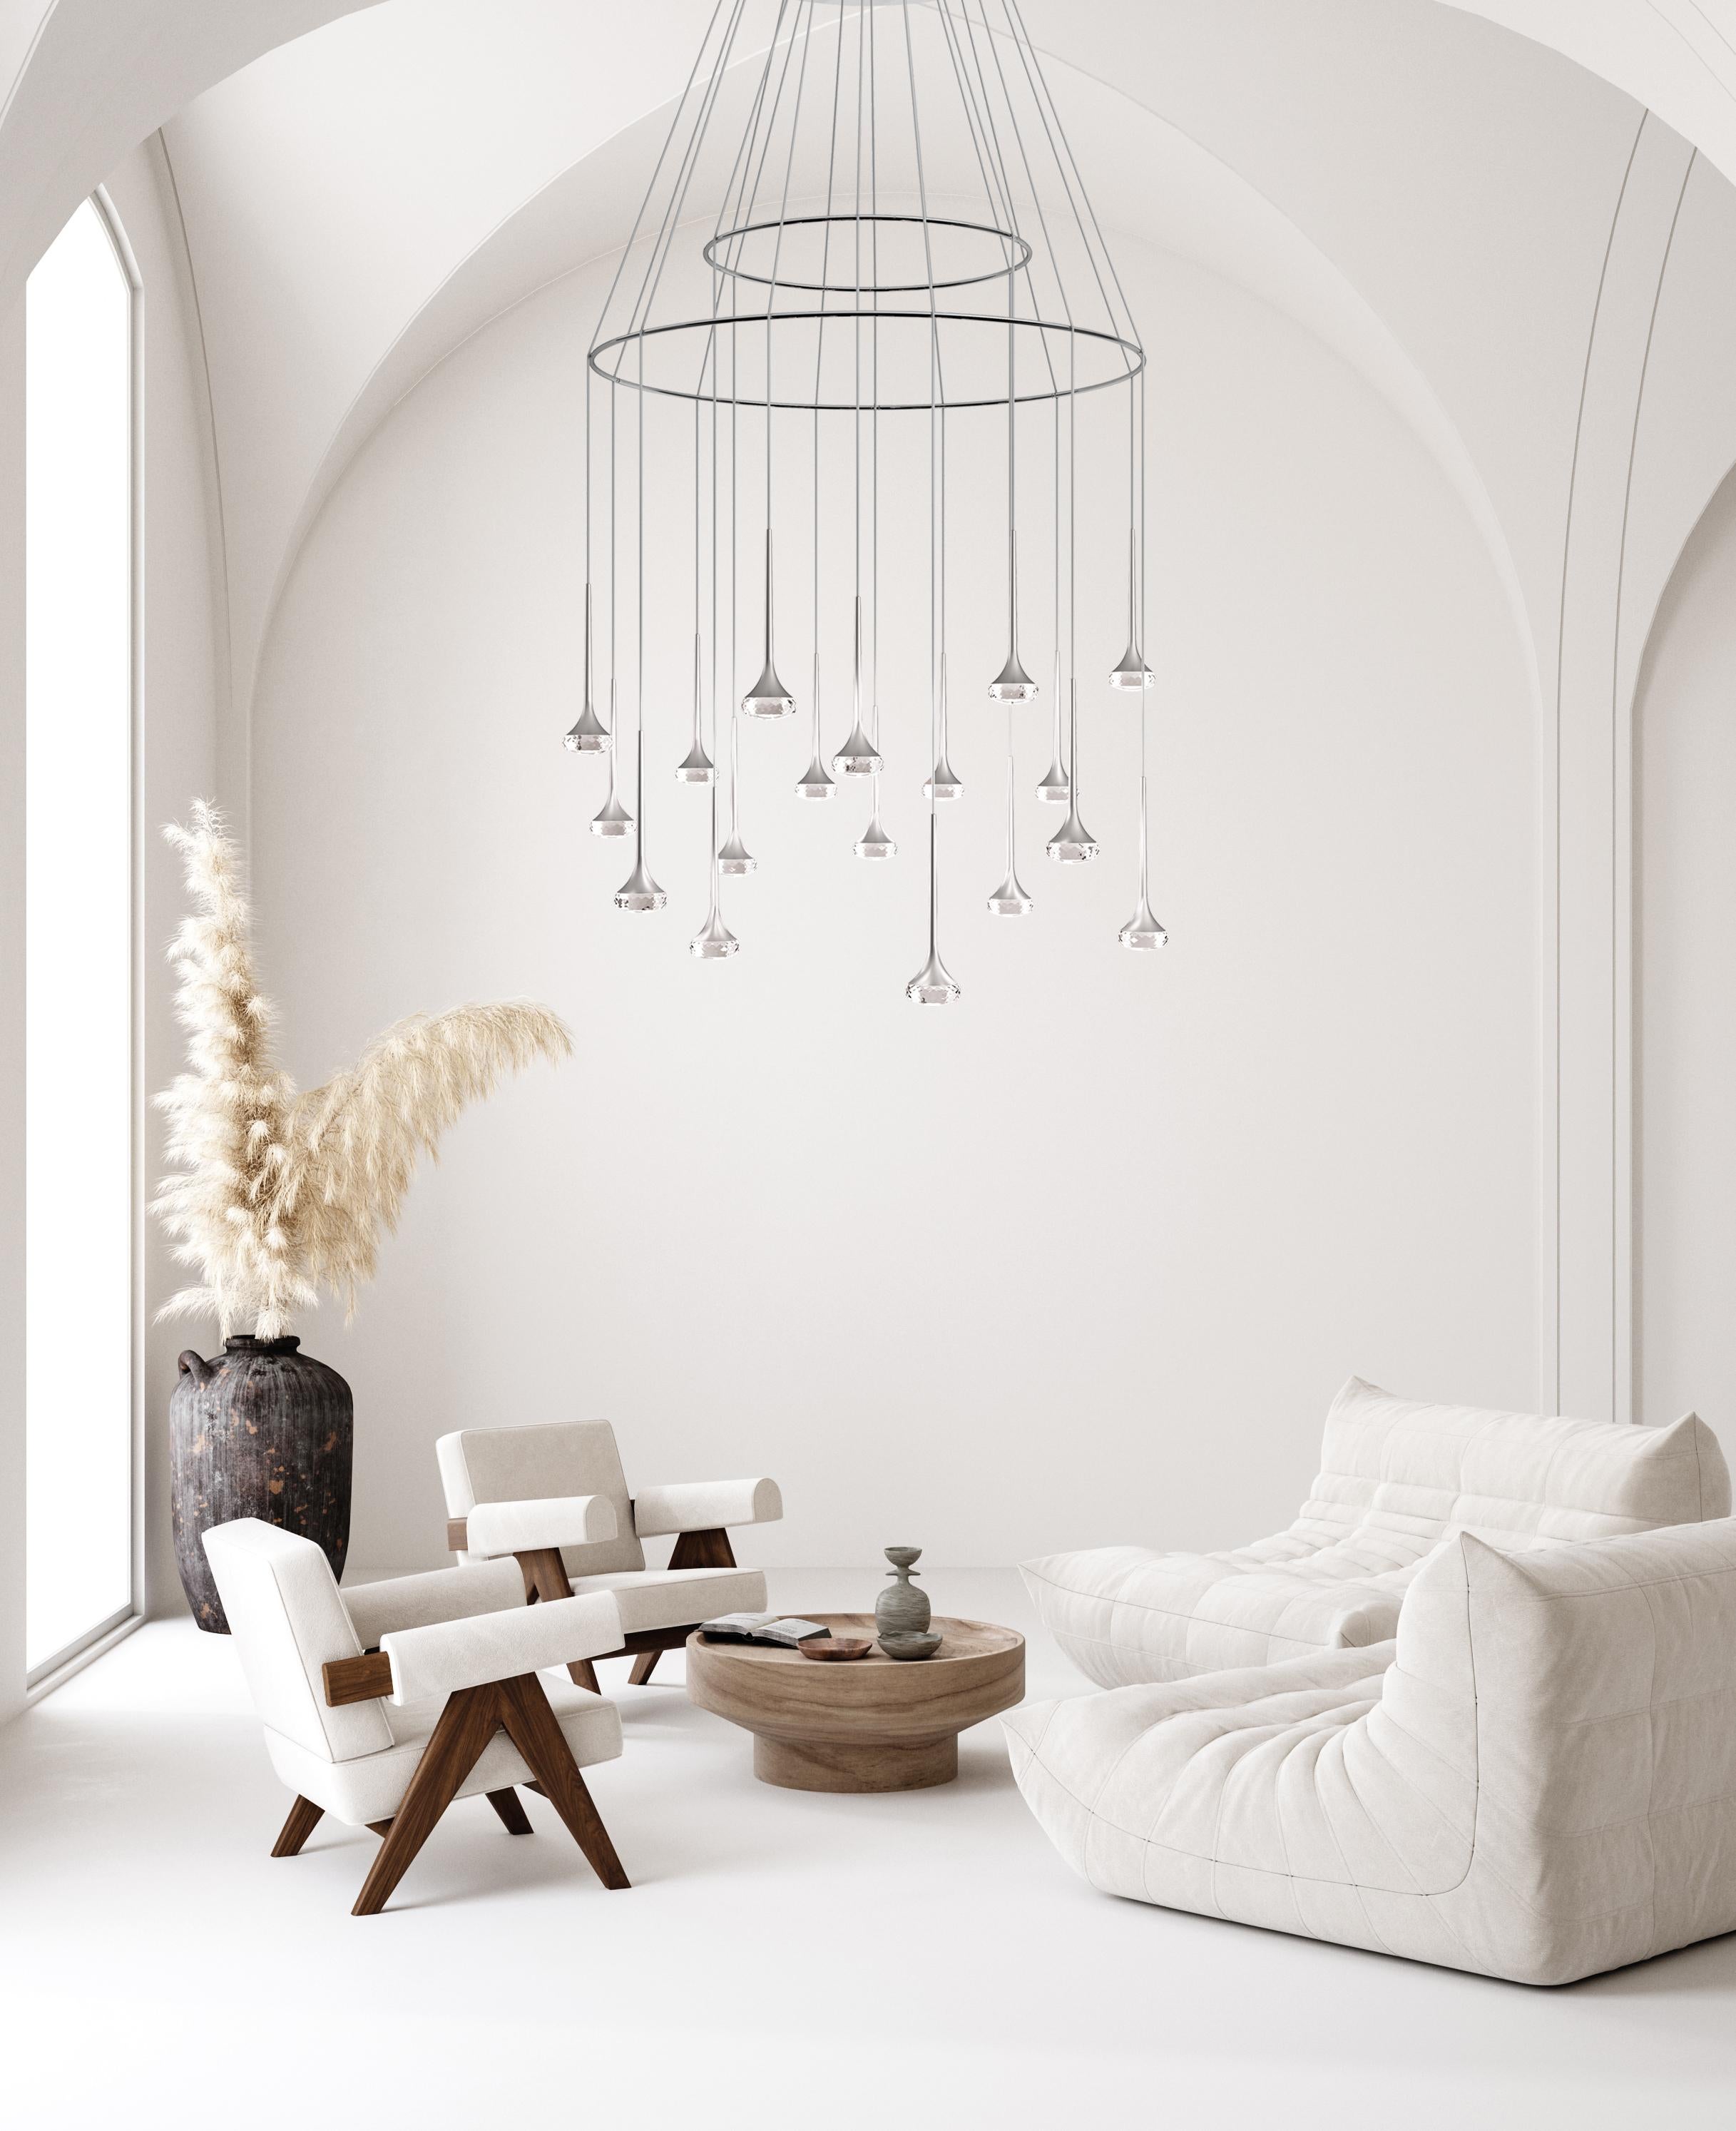 Axolight Fairy Large Suspension Pendant Lamp with White Chrome Finish and Metal Body in Crystal by Manuel & Vanessa Vivian

Multiple reflections and iridiscent symmetries go through the matter to generate new forms. The clarity of aluminum meets the